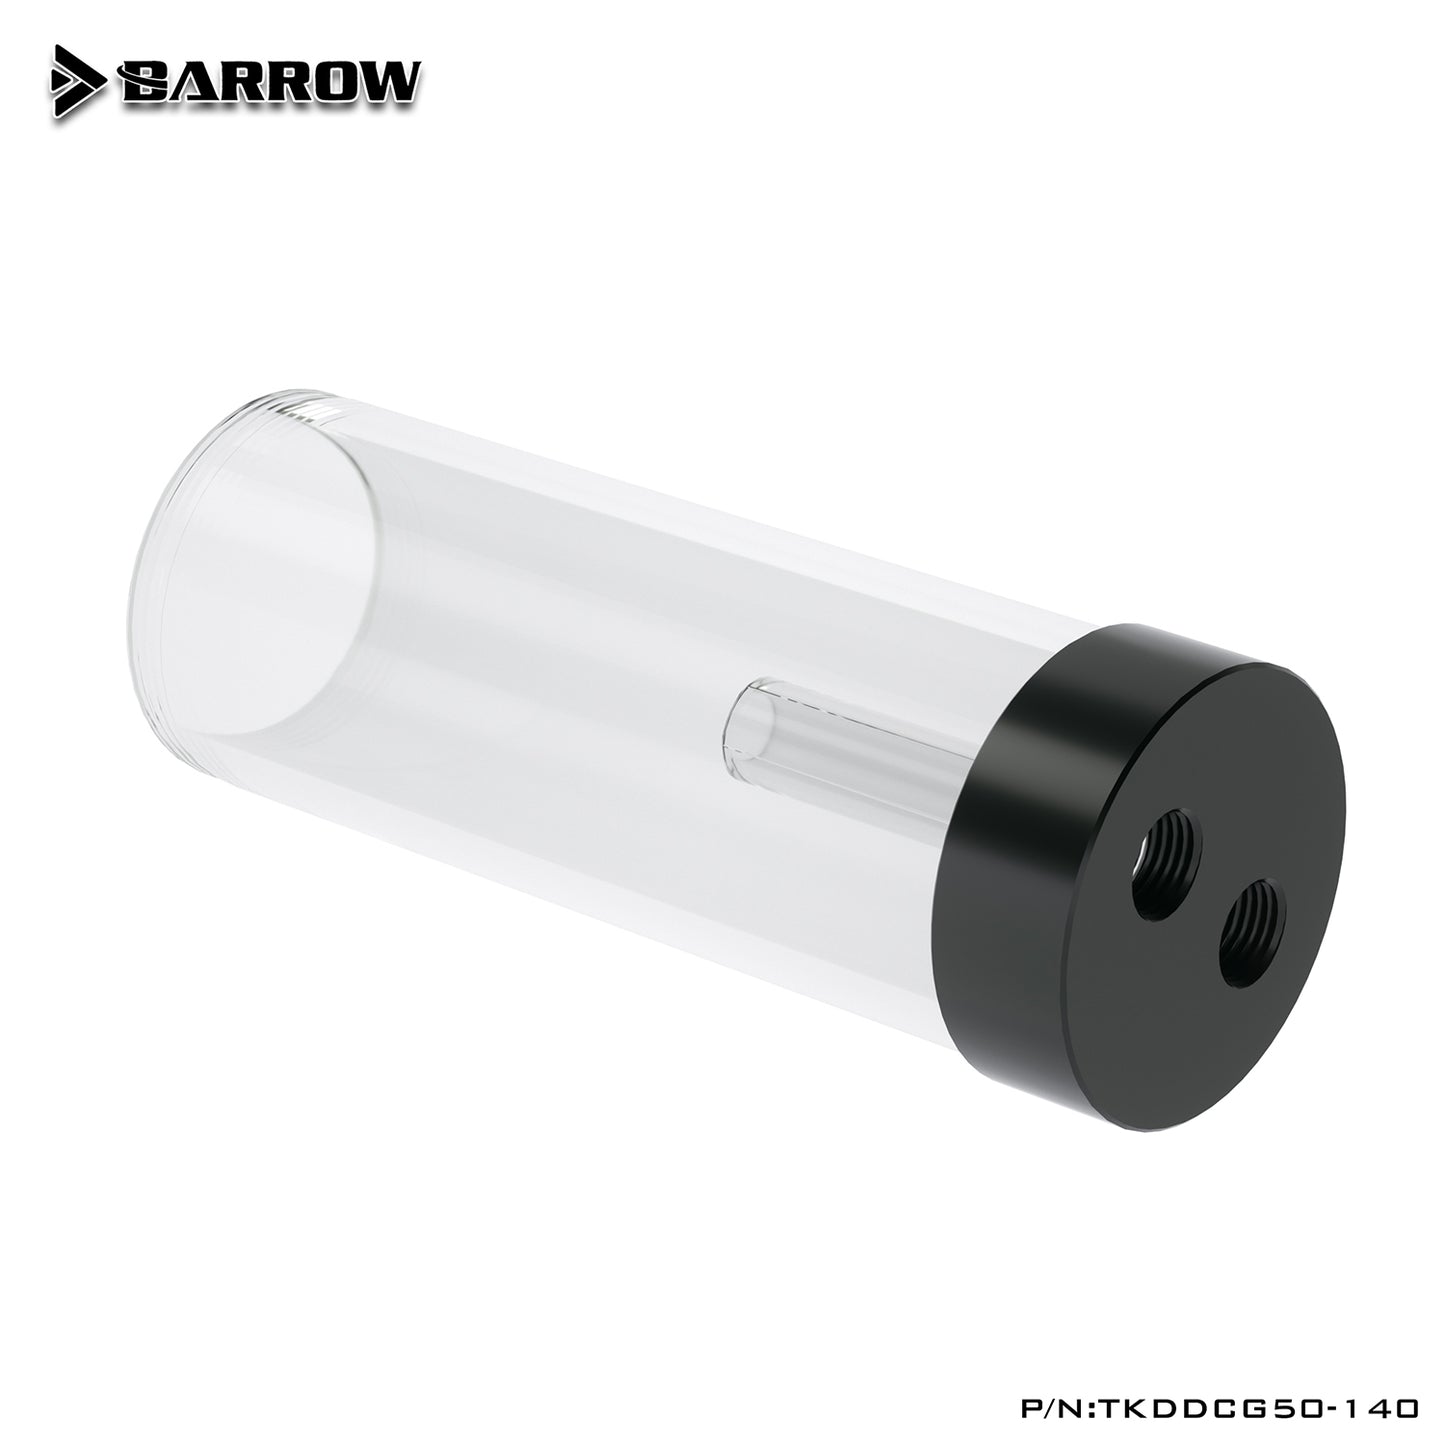 Barrow 17W Series Combination Reservoirs, For Barrow 17W Pumps With Thread, TKDDCG50